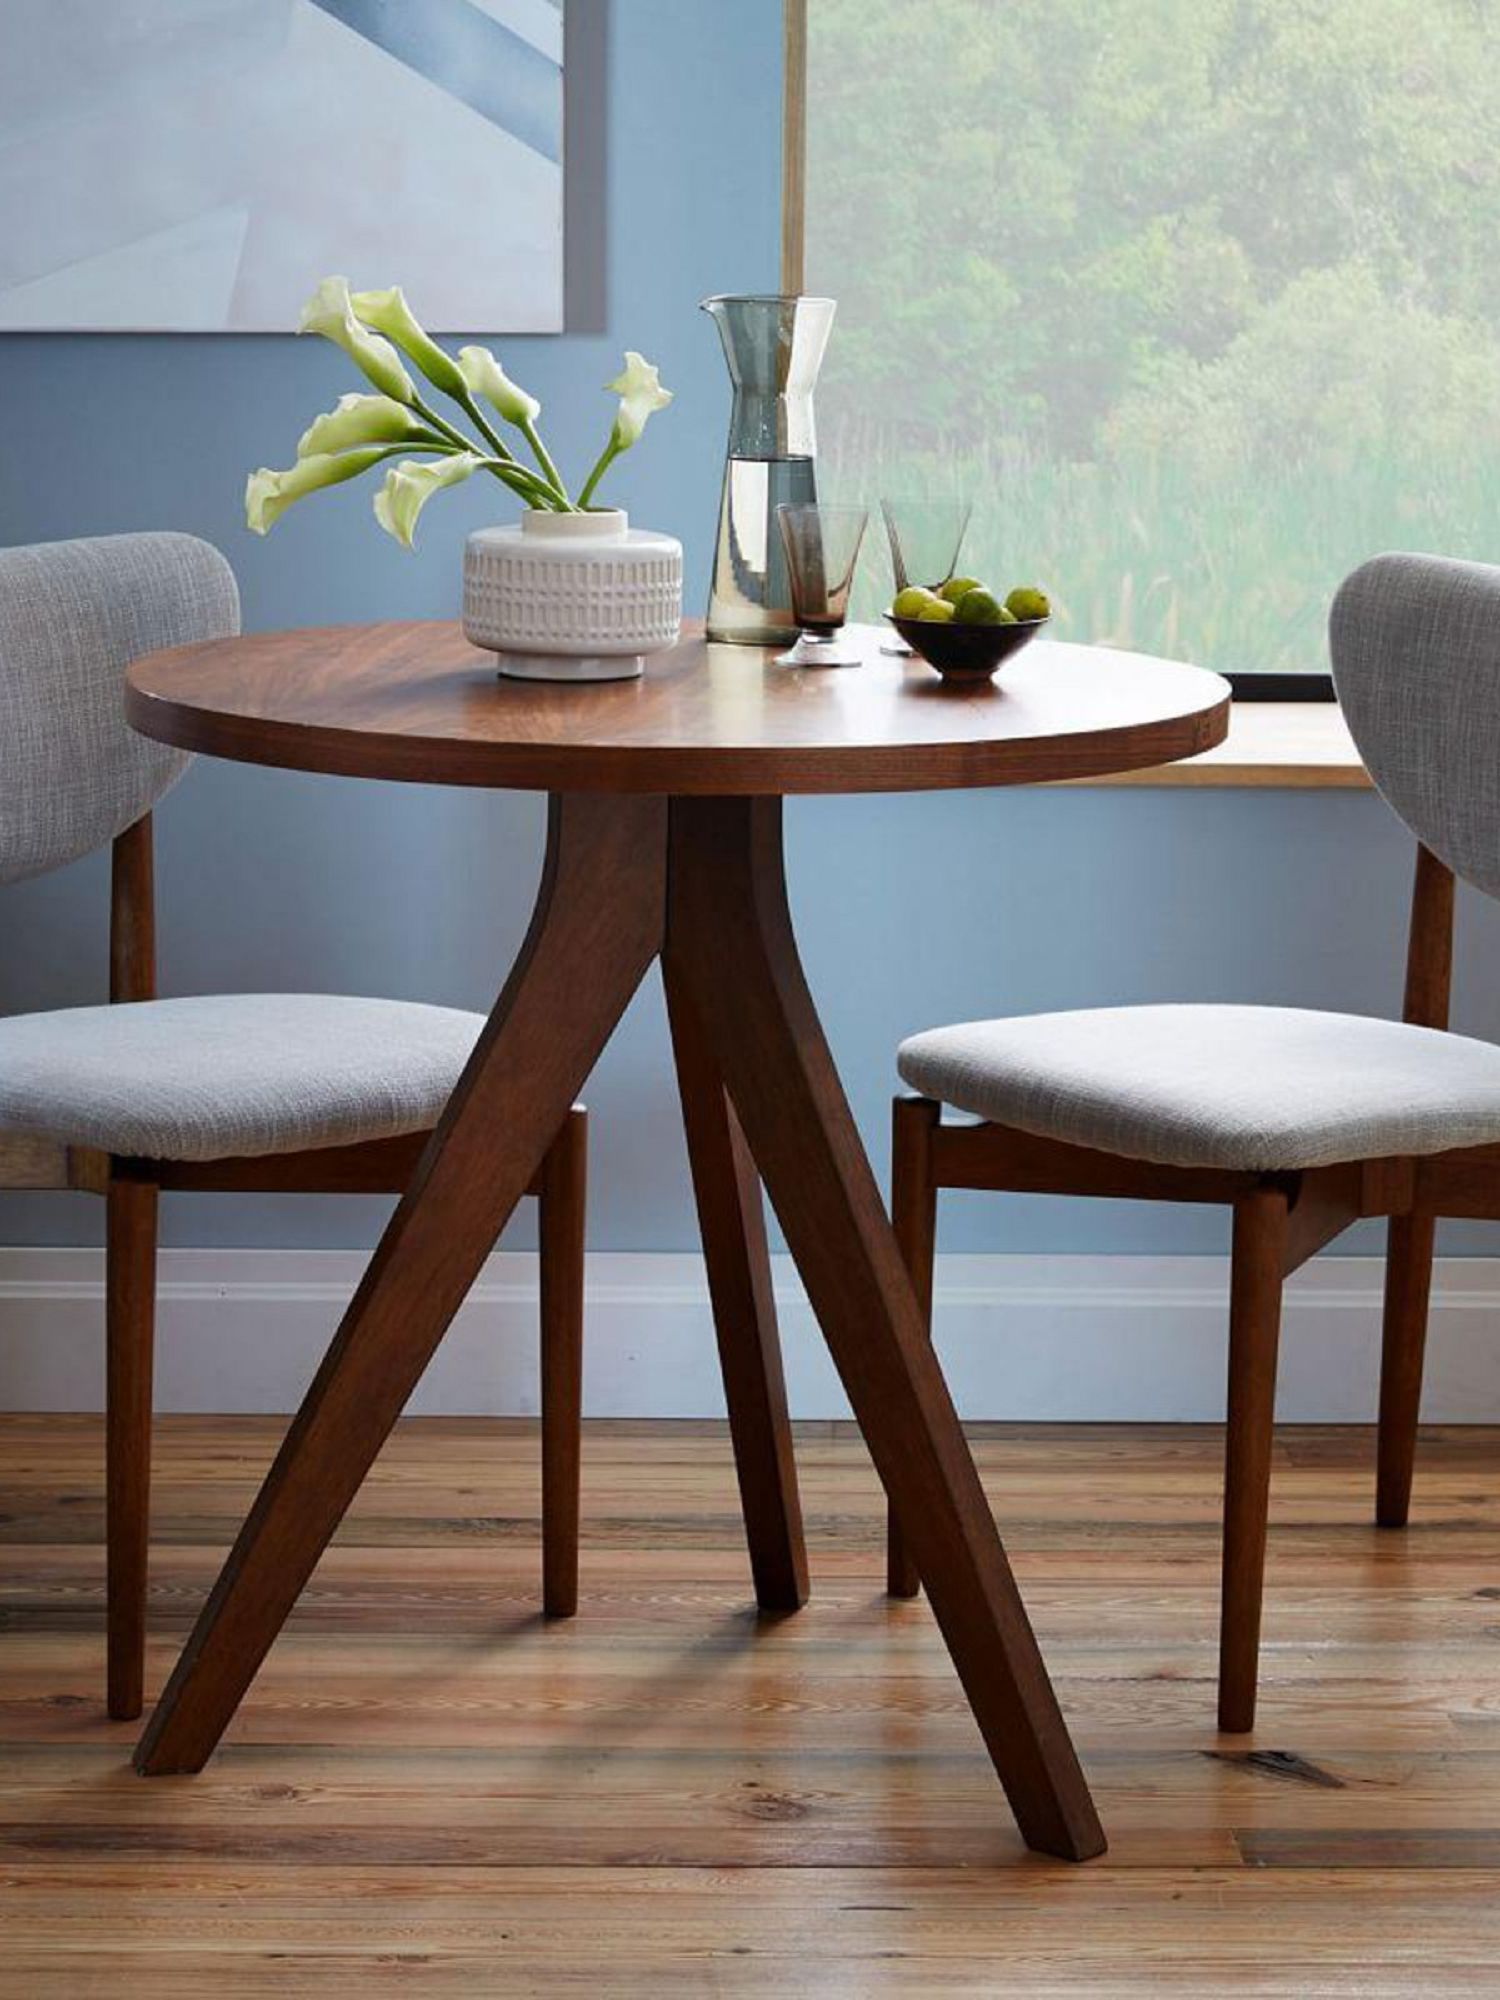 Foldaway Dining Table For 2 - Go-images Web